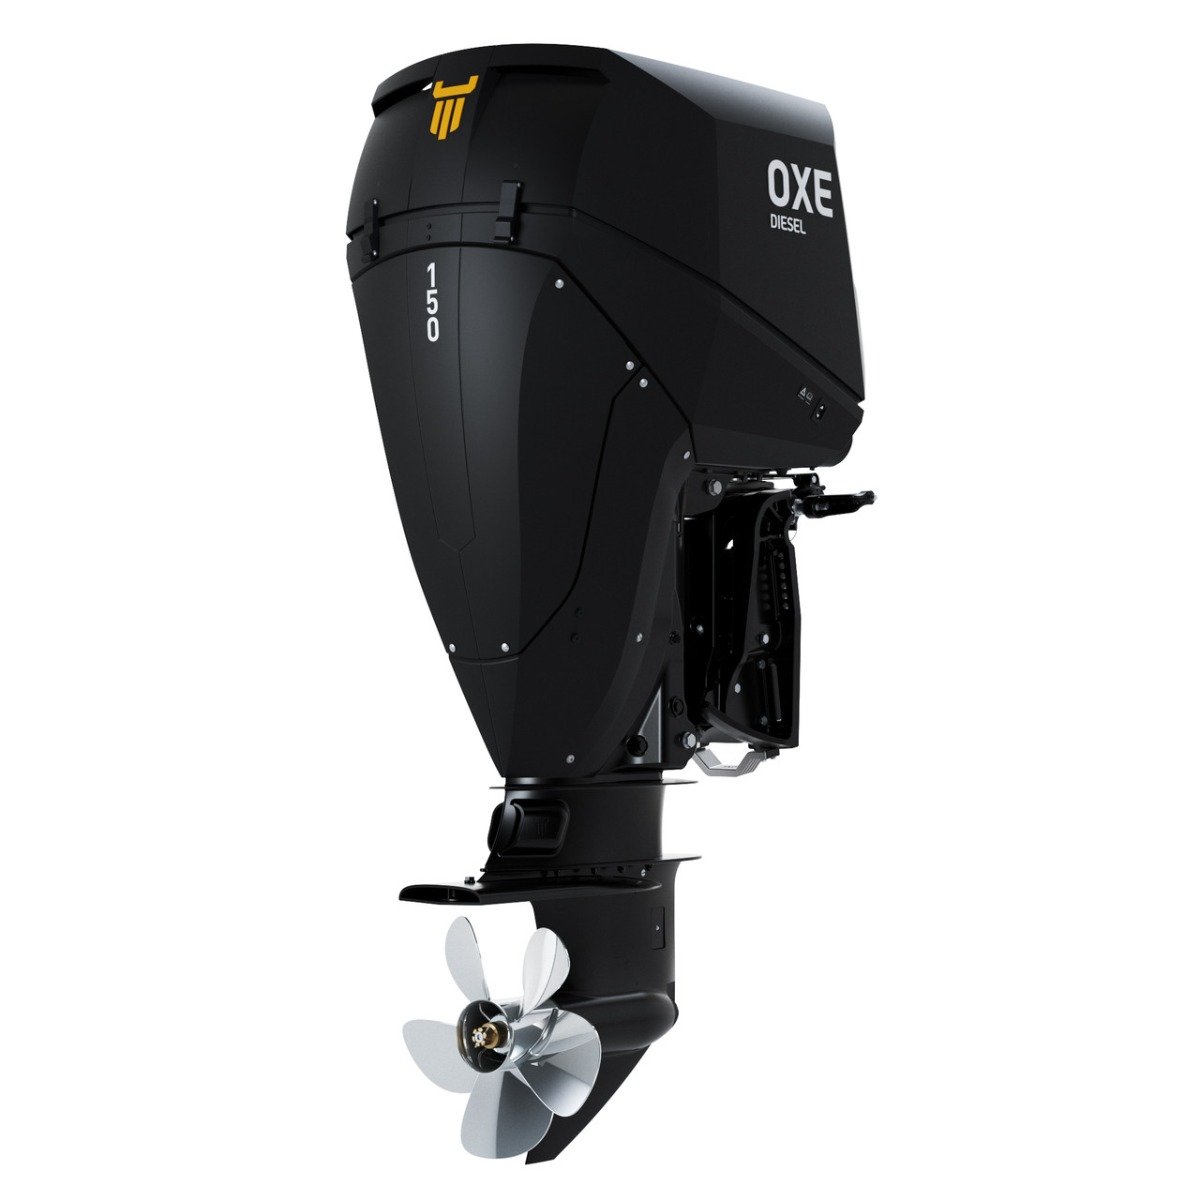 Engine outboard Diesel 150HP OXE25